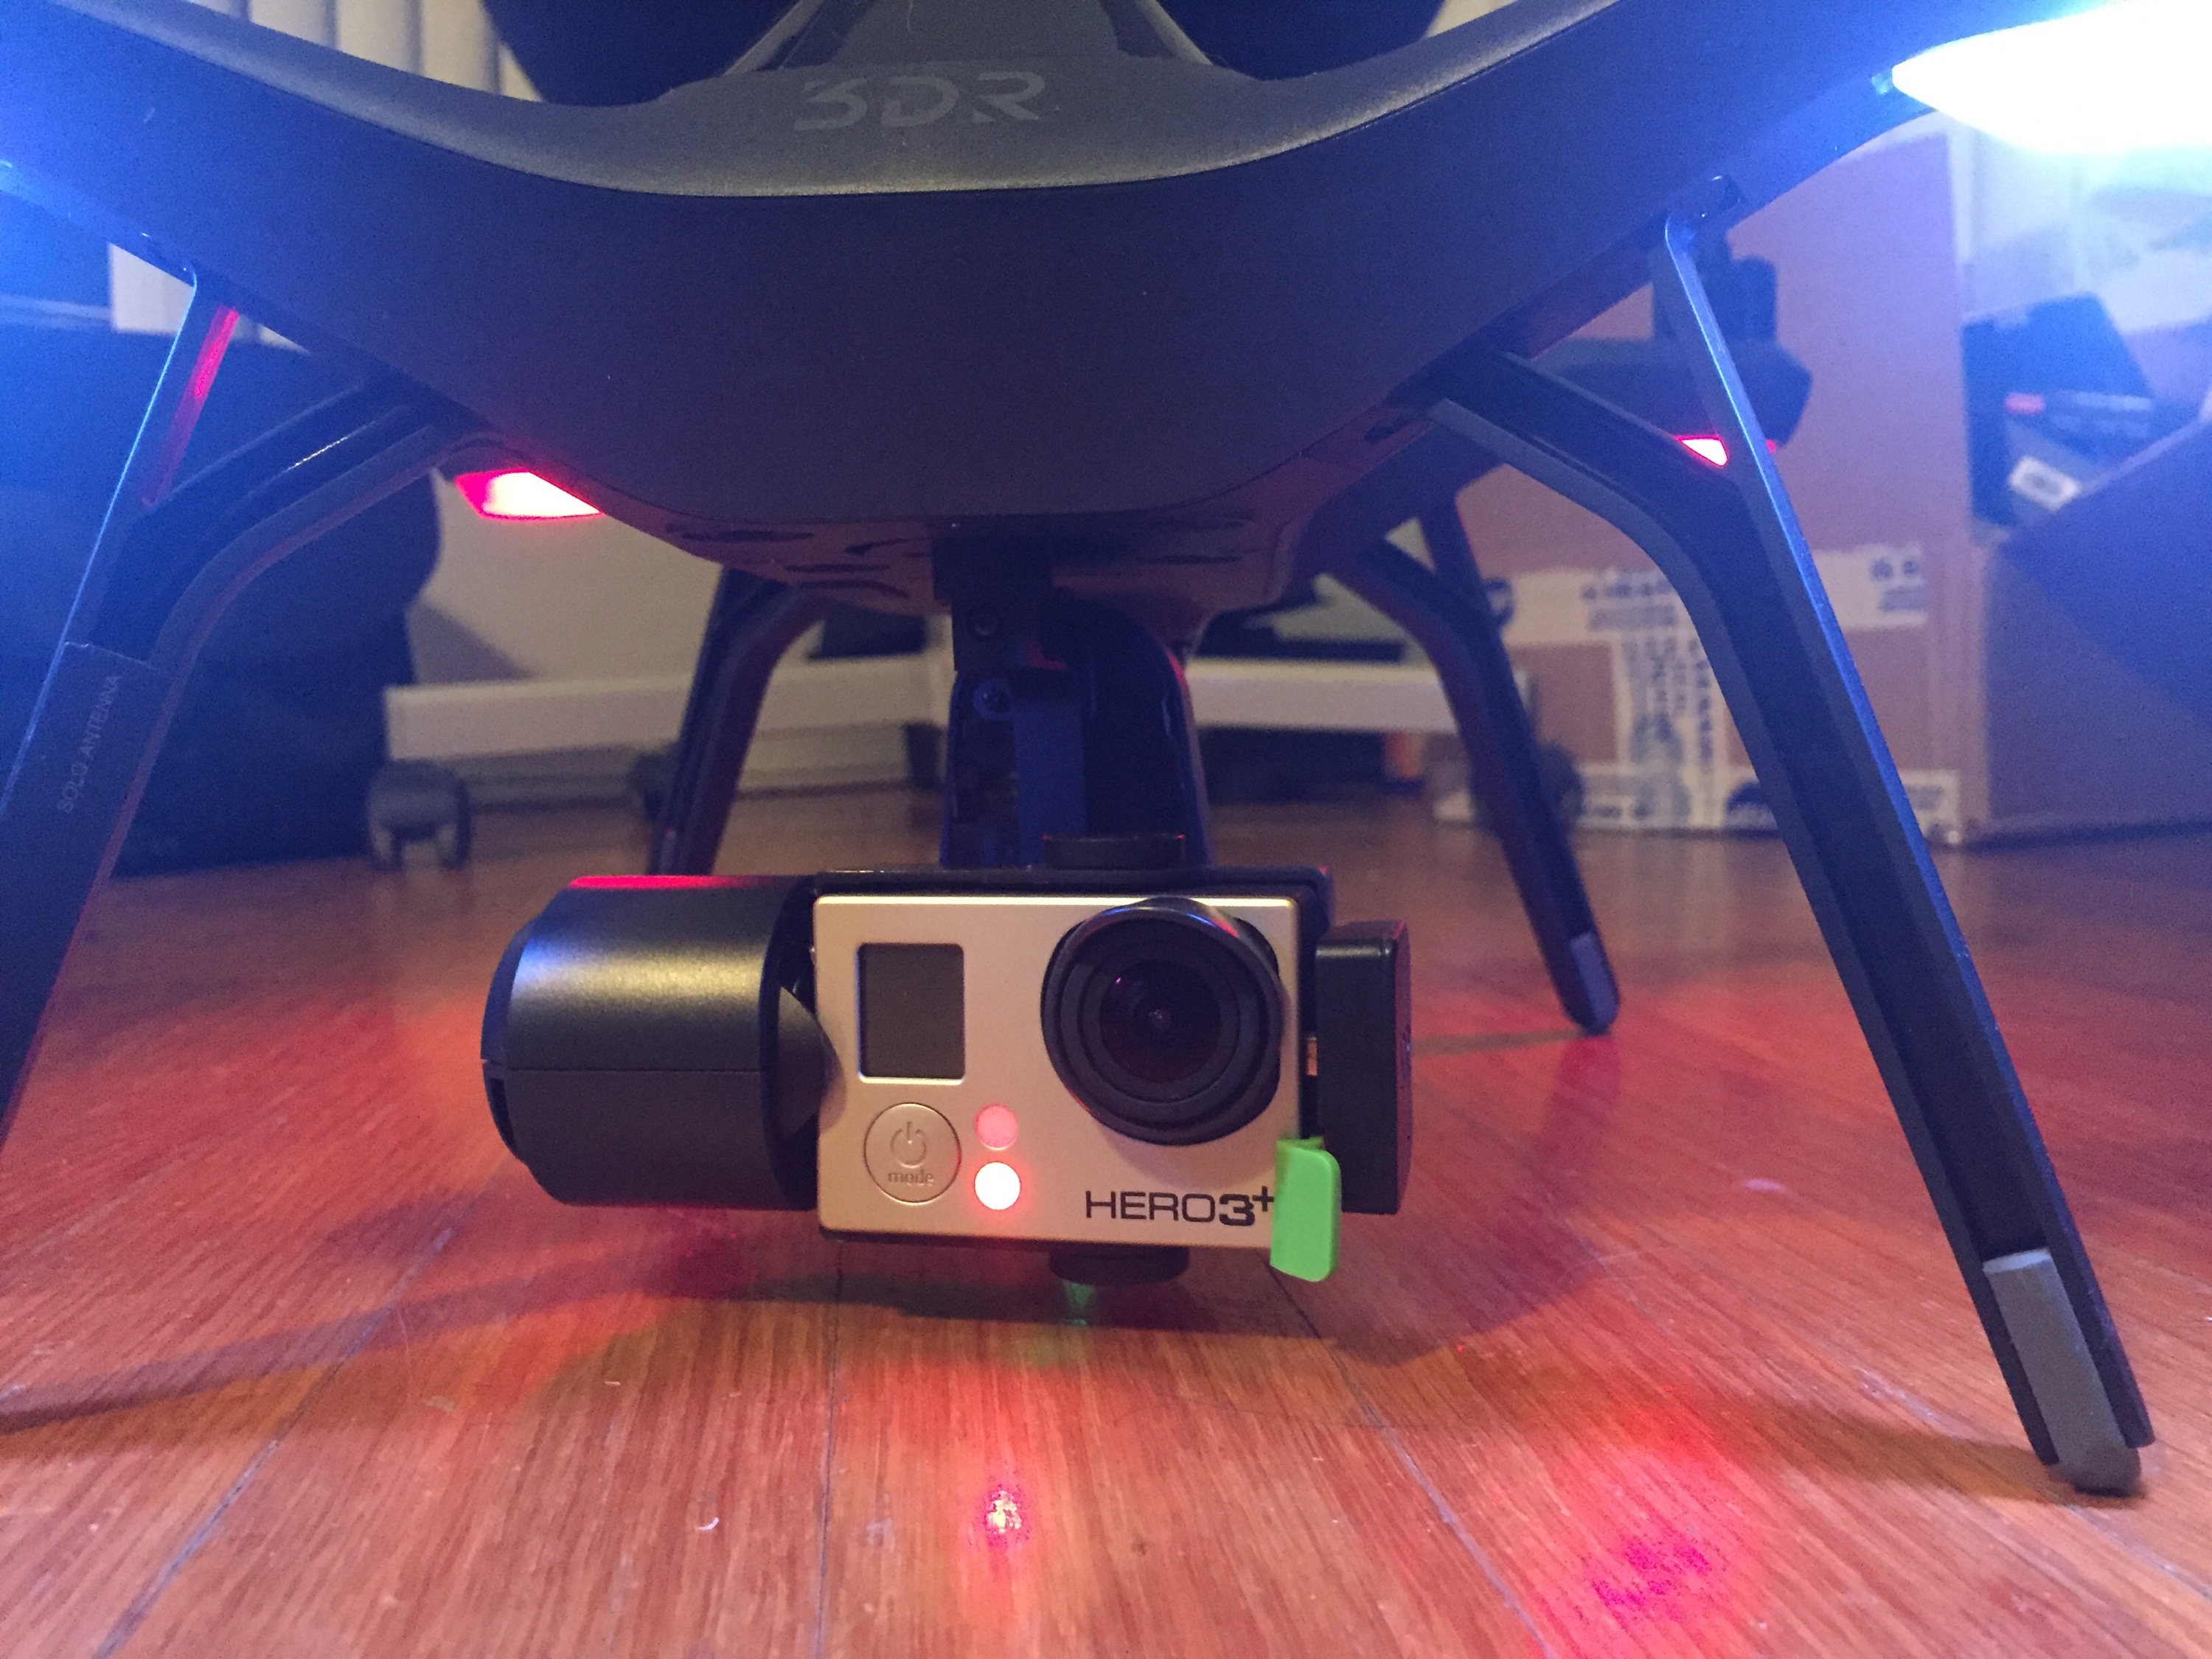 3DR Solo Drone Arrives. Glitches Keep It Grounded. 3DR Non-Responsive 3